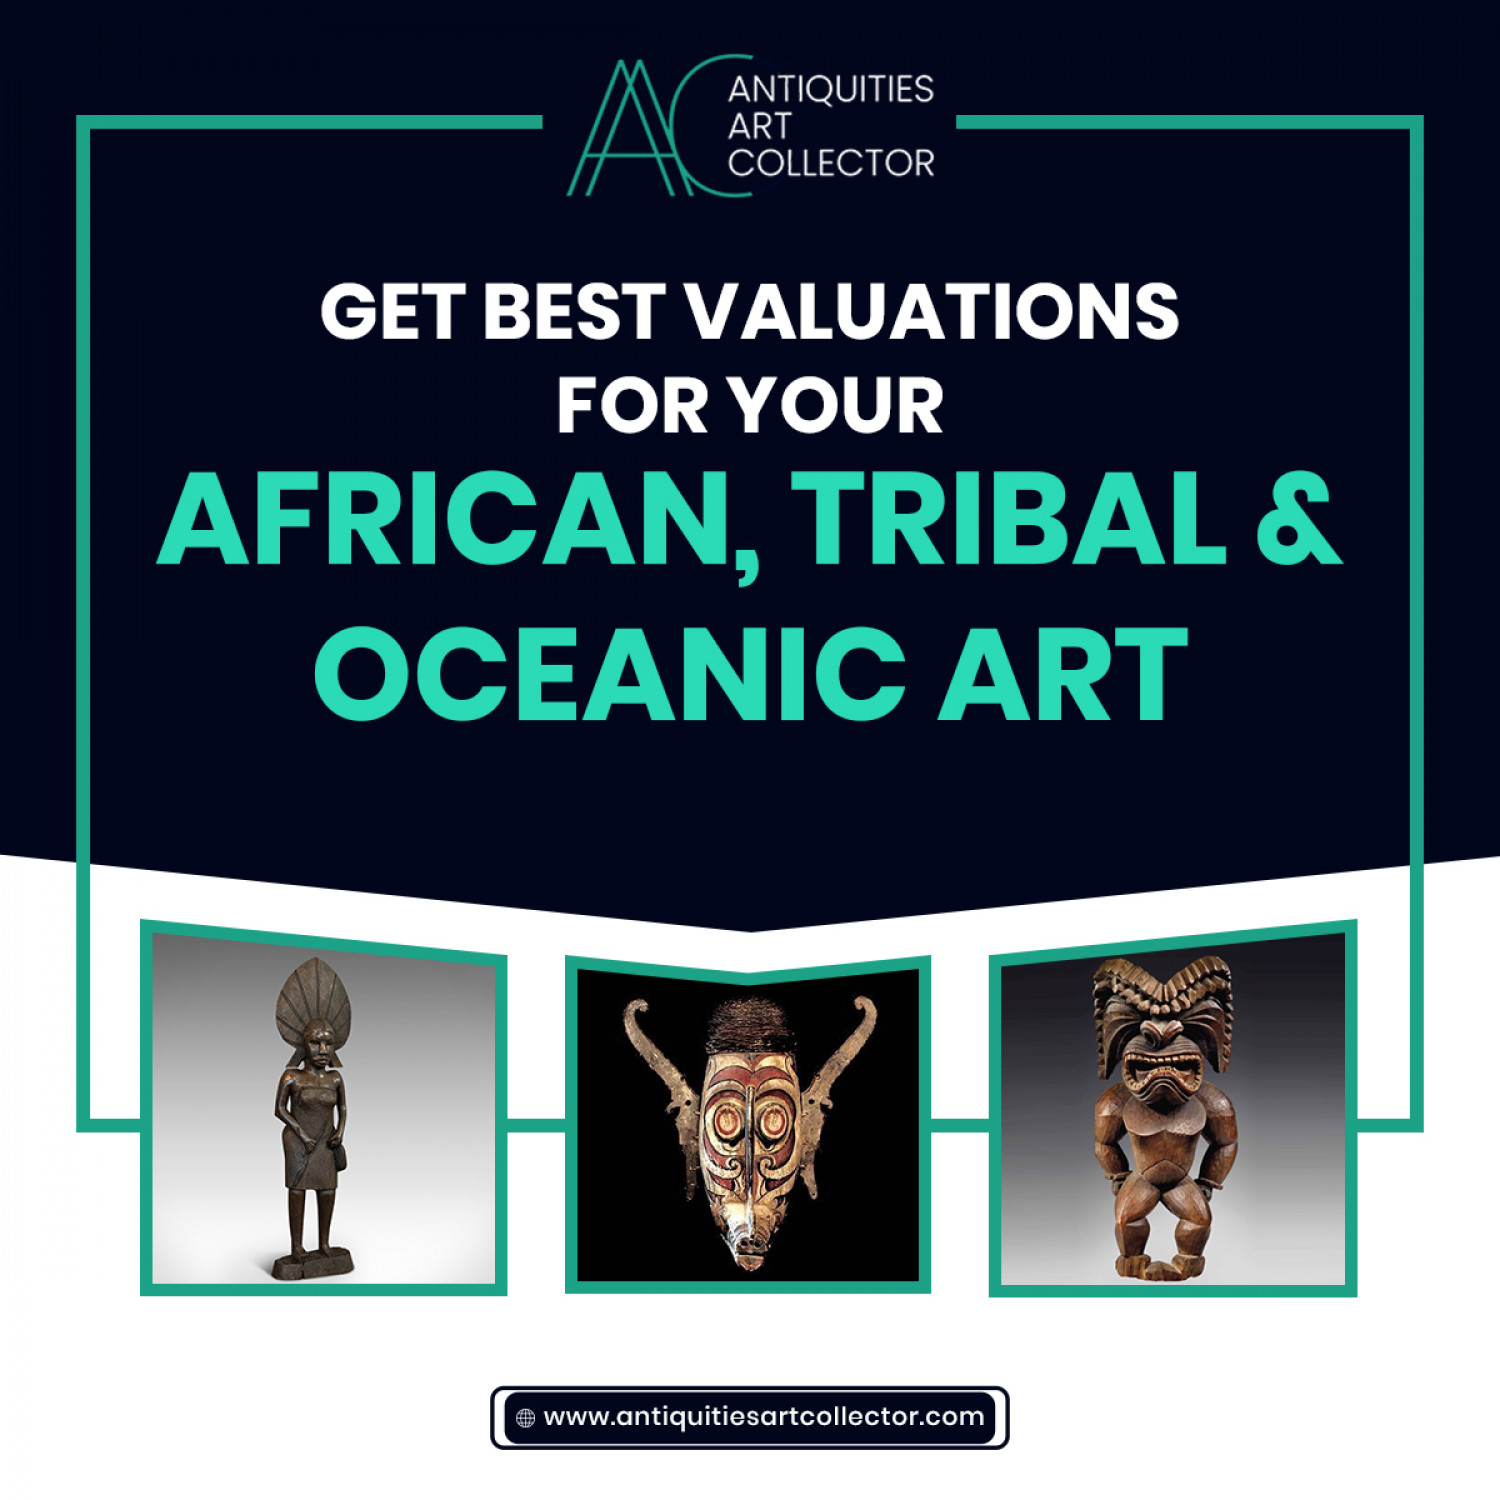 Sell Your African Antiques For A Great Price To Antiquities Art Collector Infographic